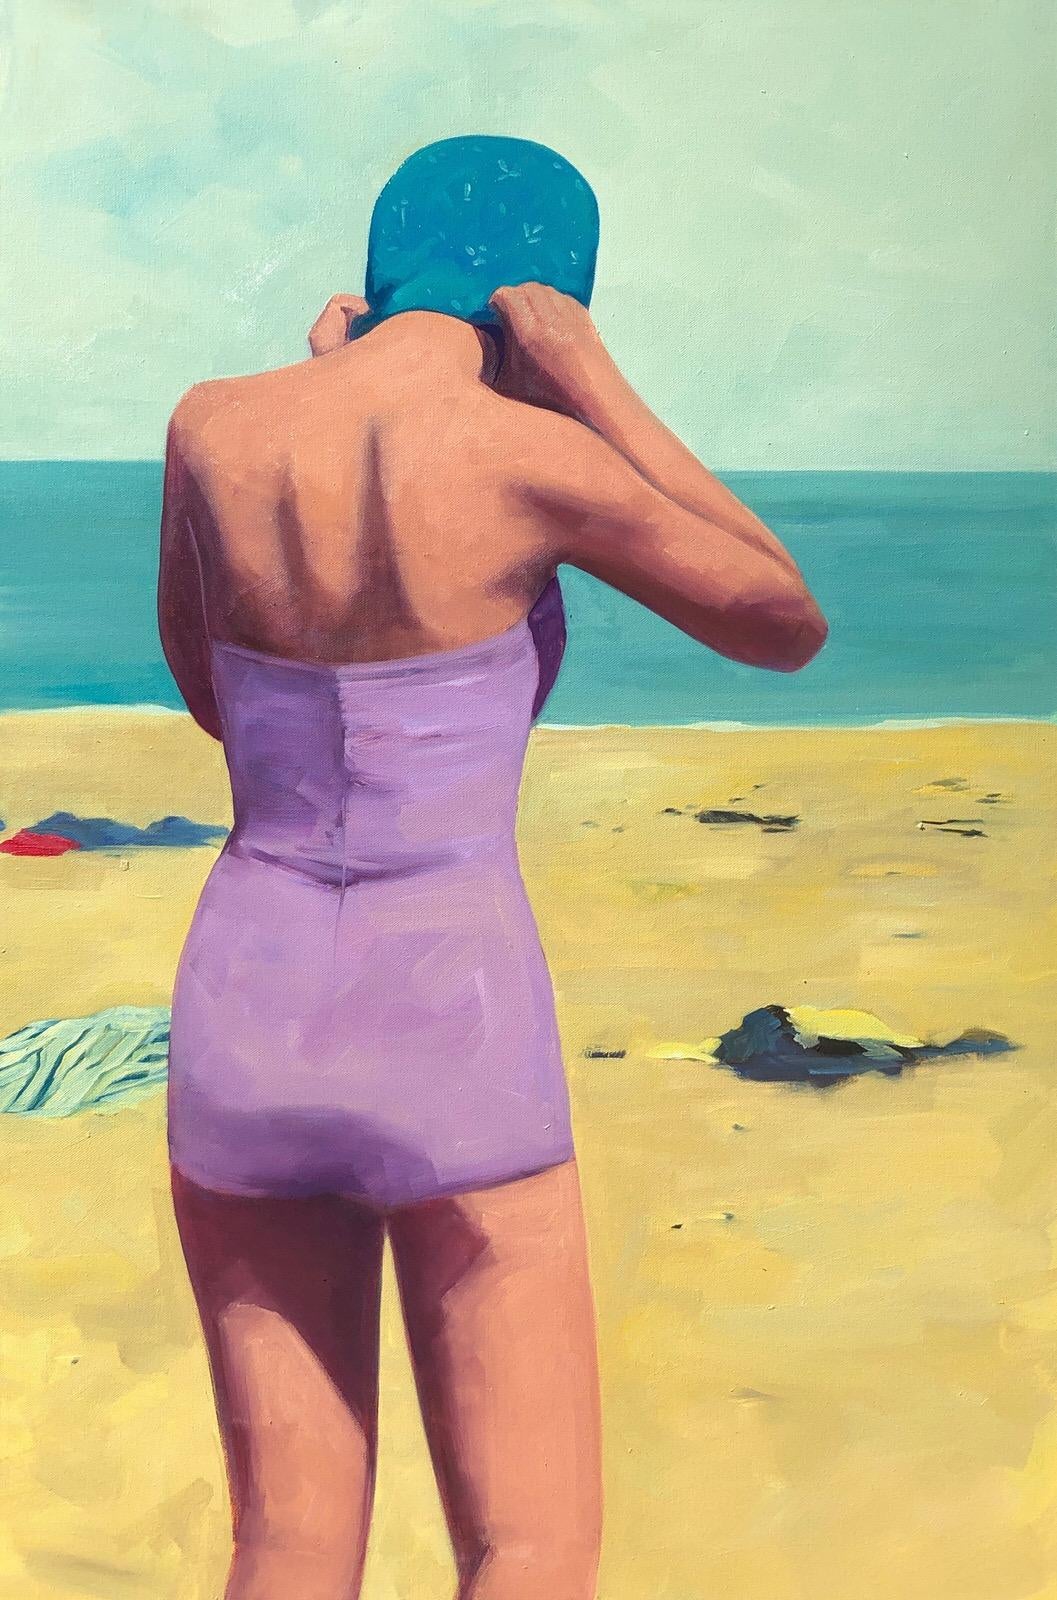 T.S. Harris Figurative Painting - "Beach Swim" oil painting of woman at the beach in purple swimsuit and blue cap